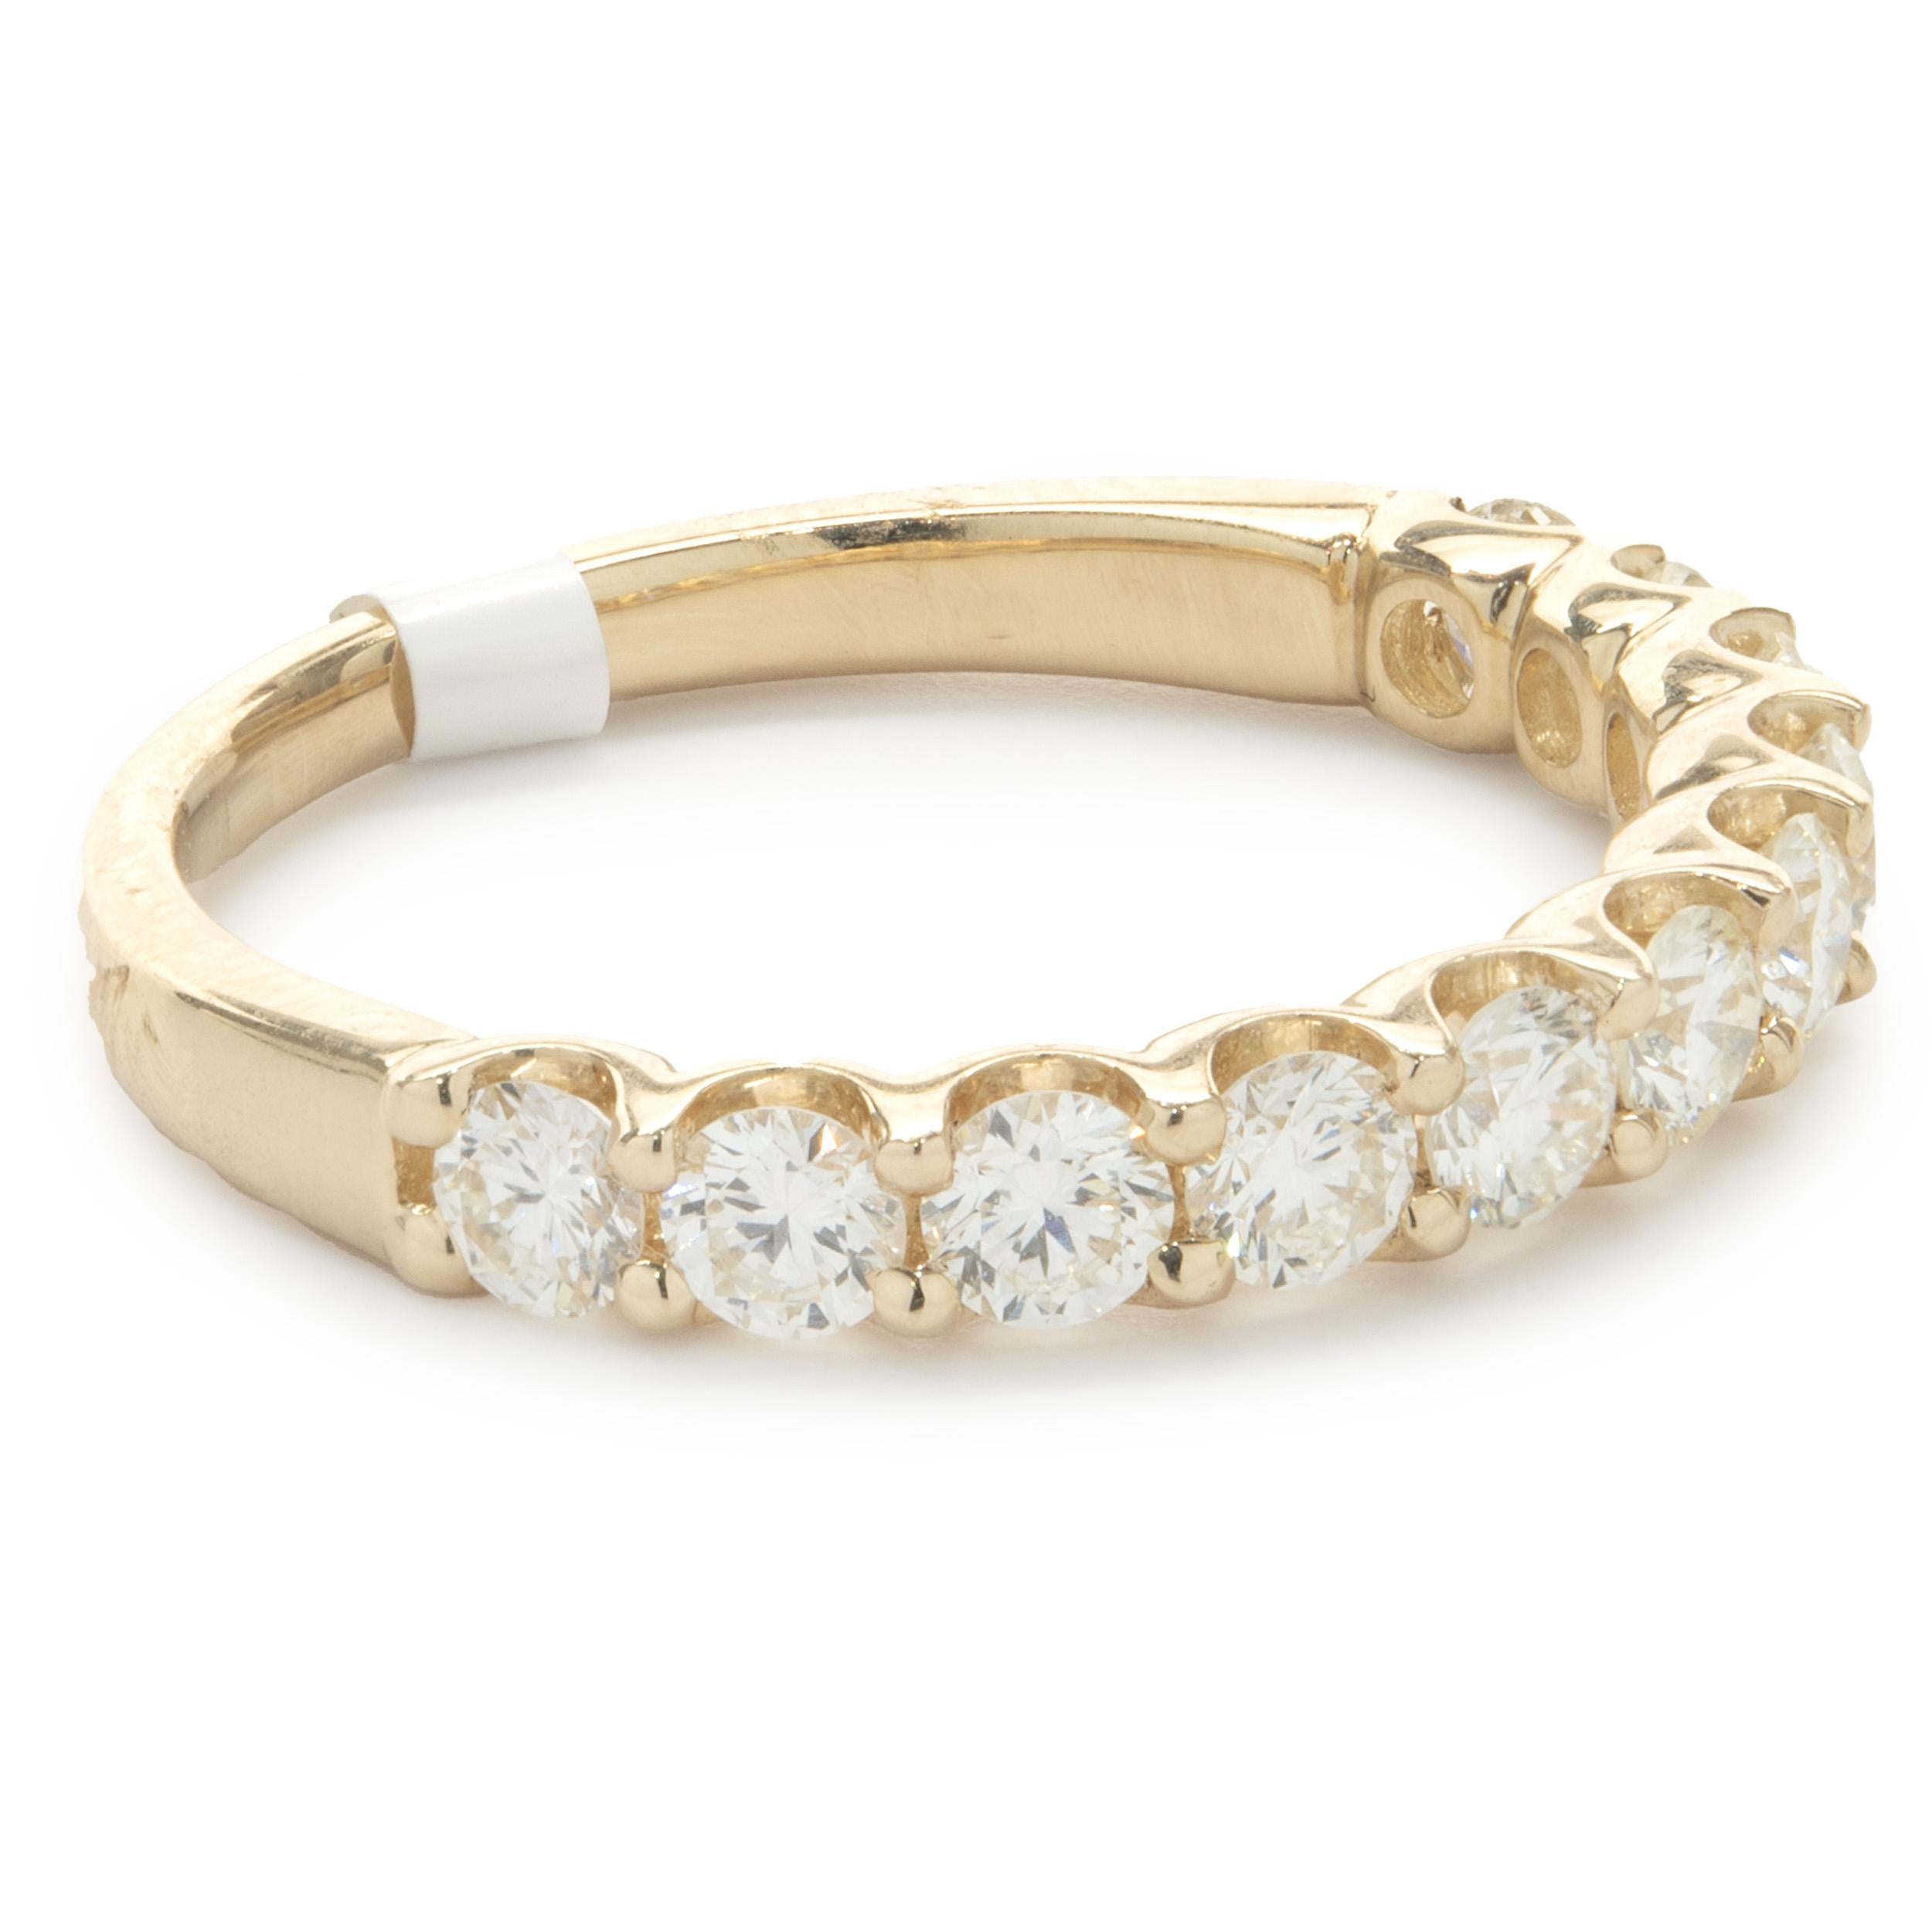 14 Karat Yellow Gold Diamond Band In Excellent Condition For Sale In Scottsdale, AZ